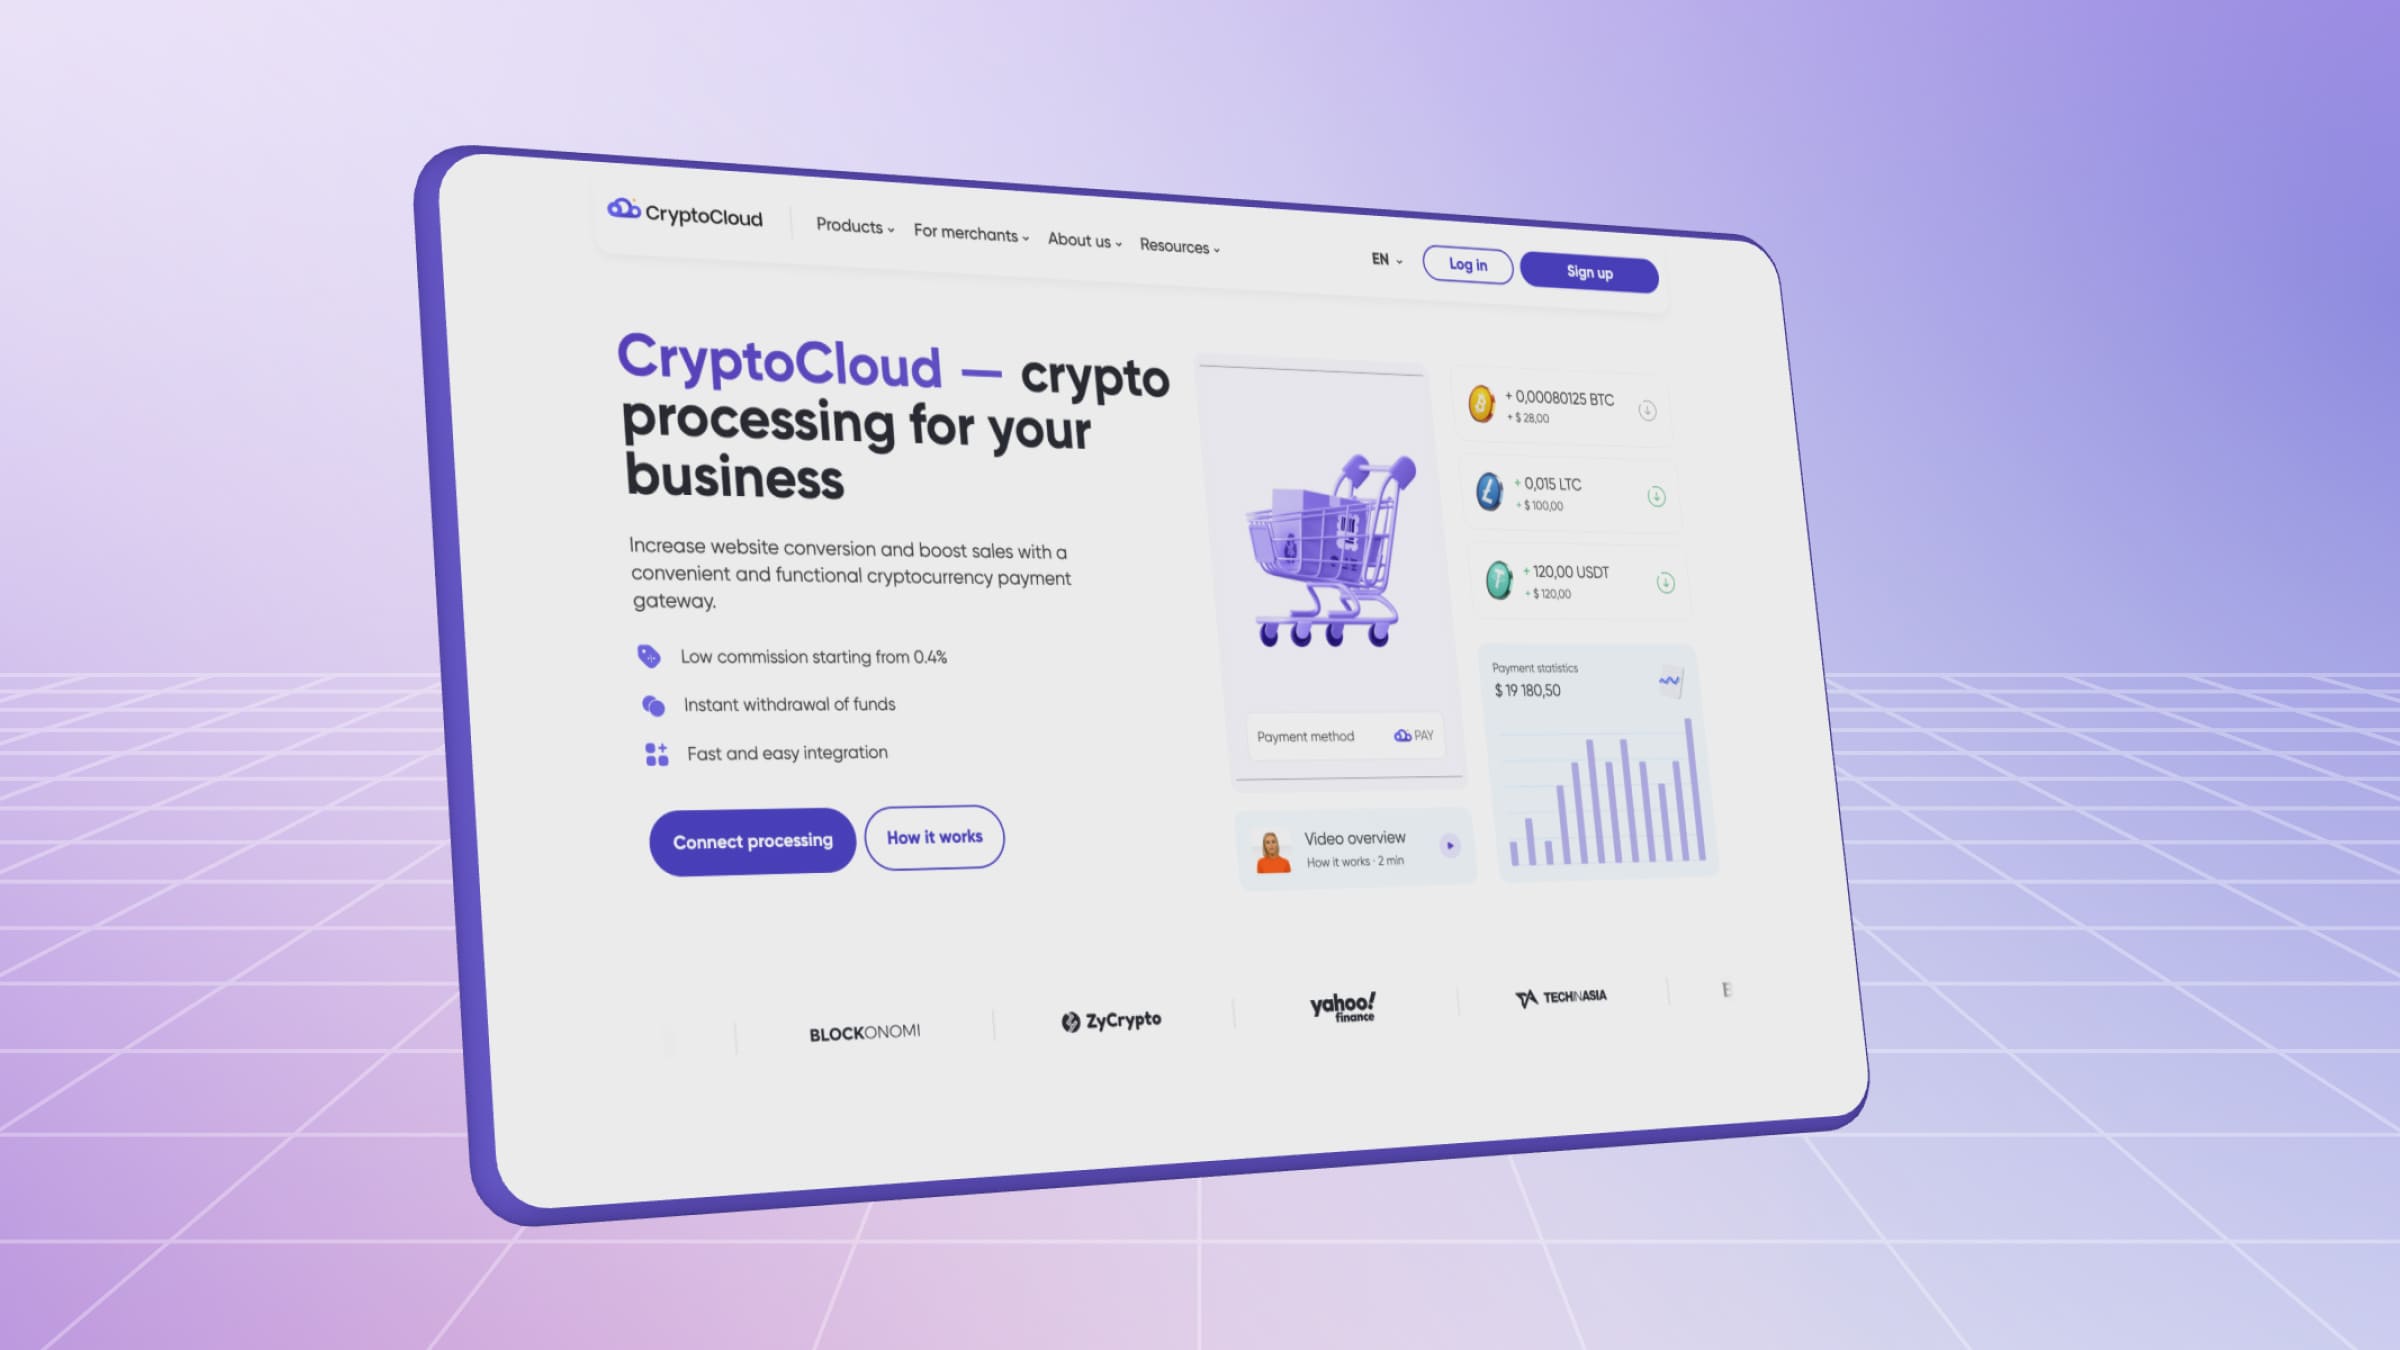 CryptoCloud is a secure crypto processing for businesses, which makes it easy to accept cryptocurrency payments.